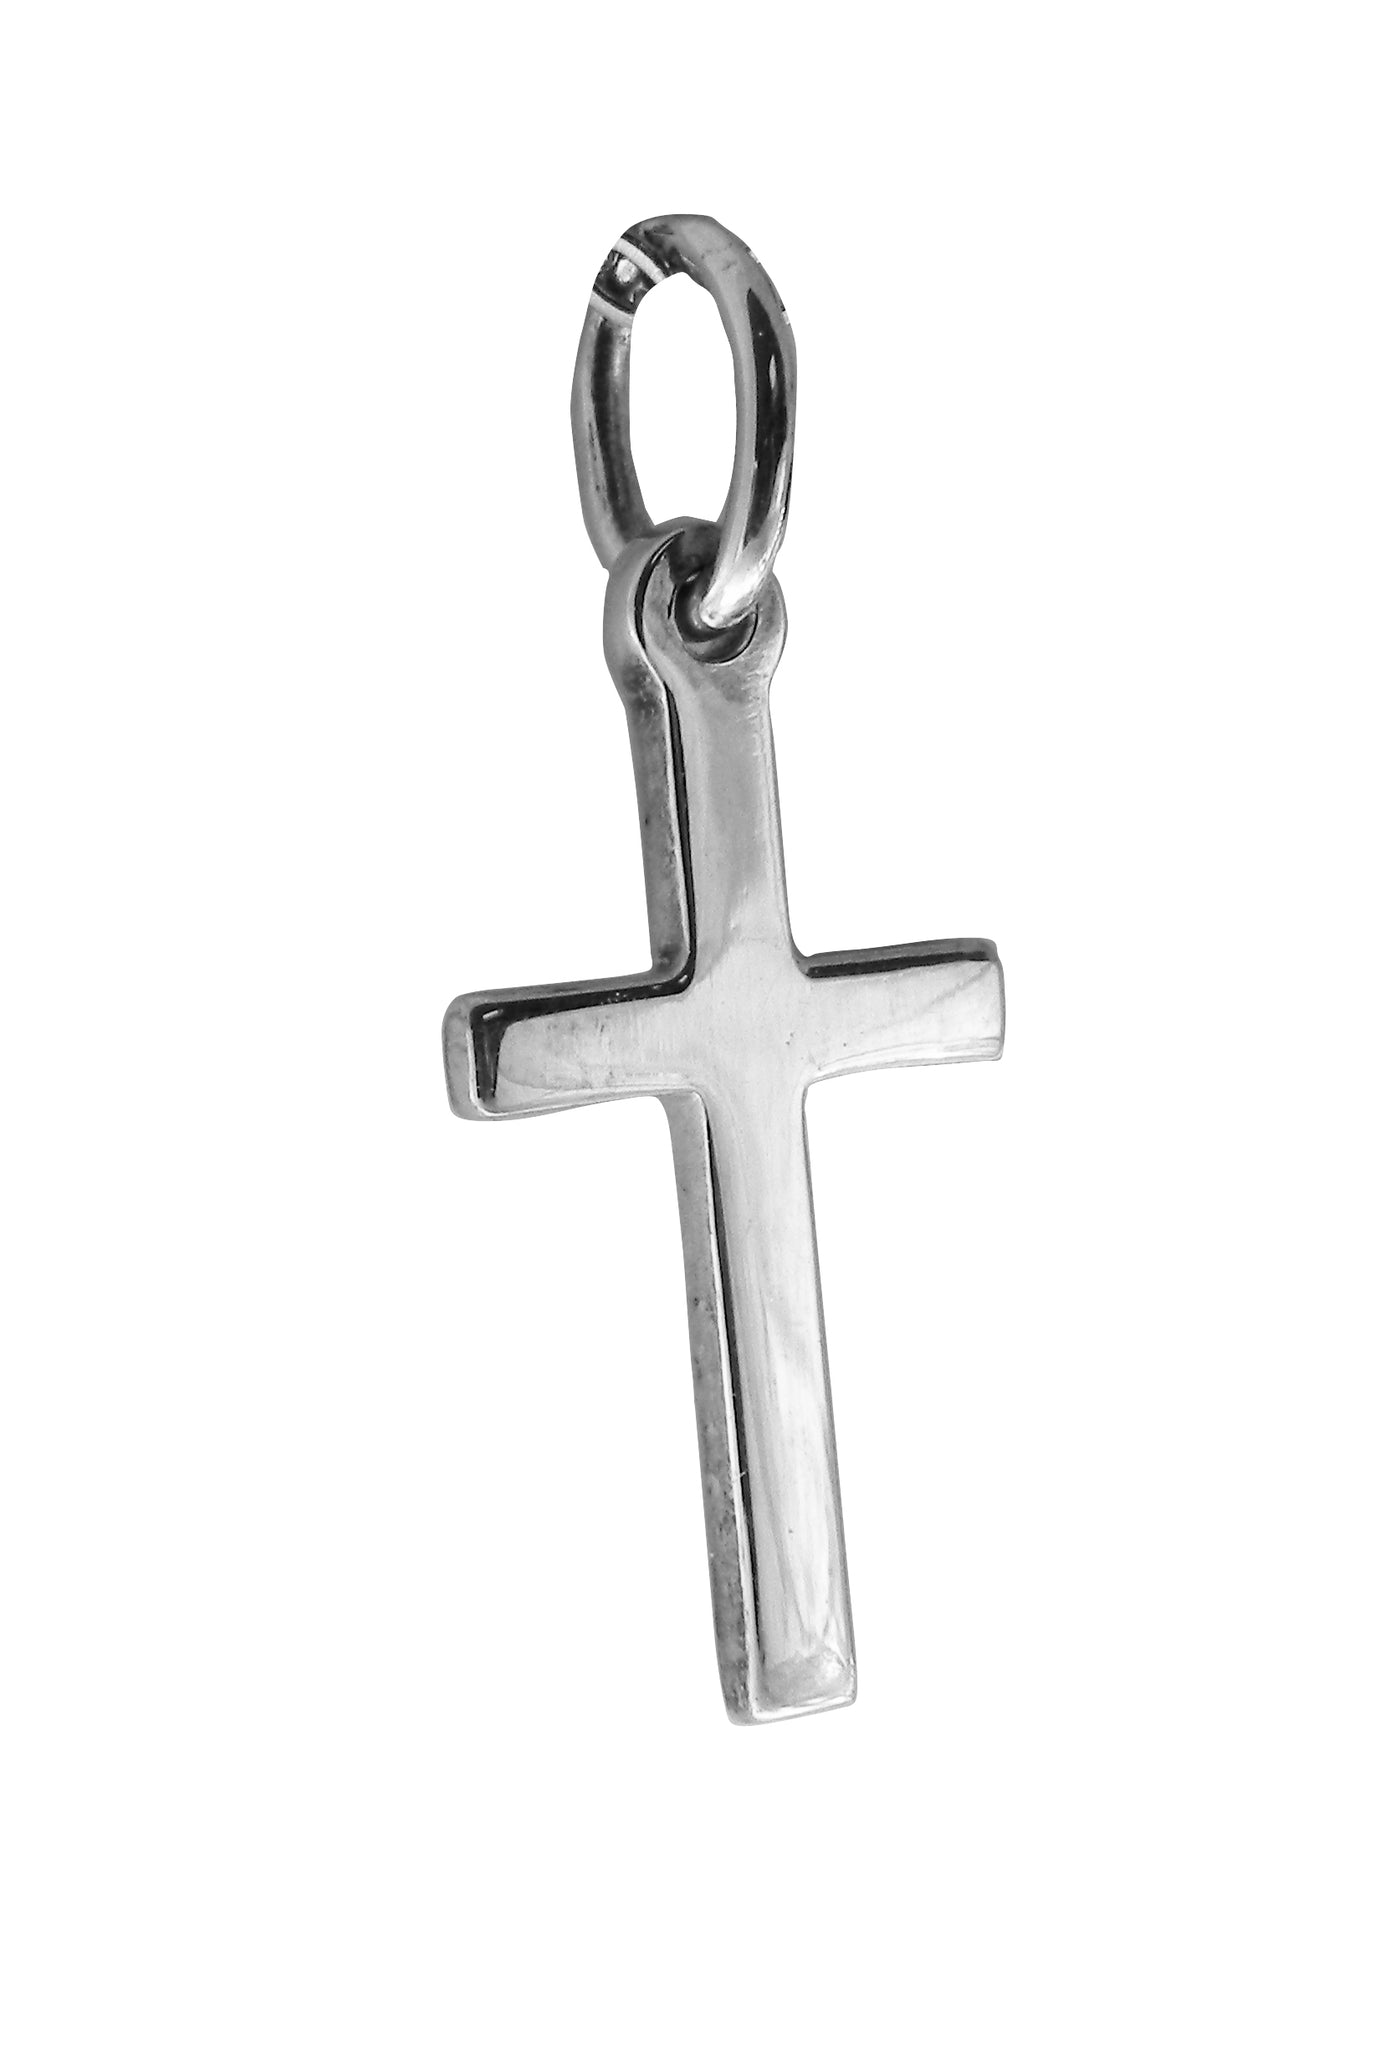 Small Cross Pendent - Religious - Plain Sterling Silver